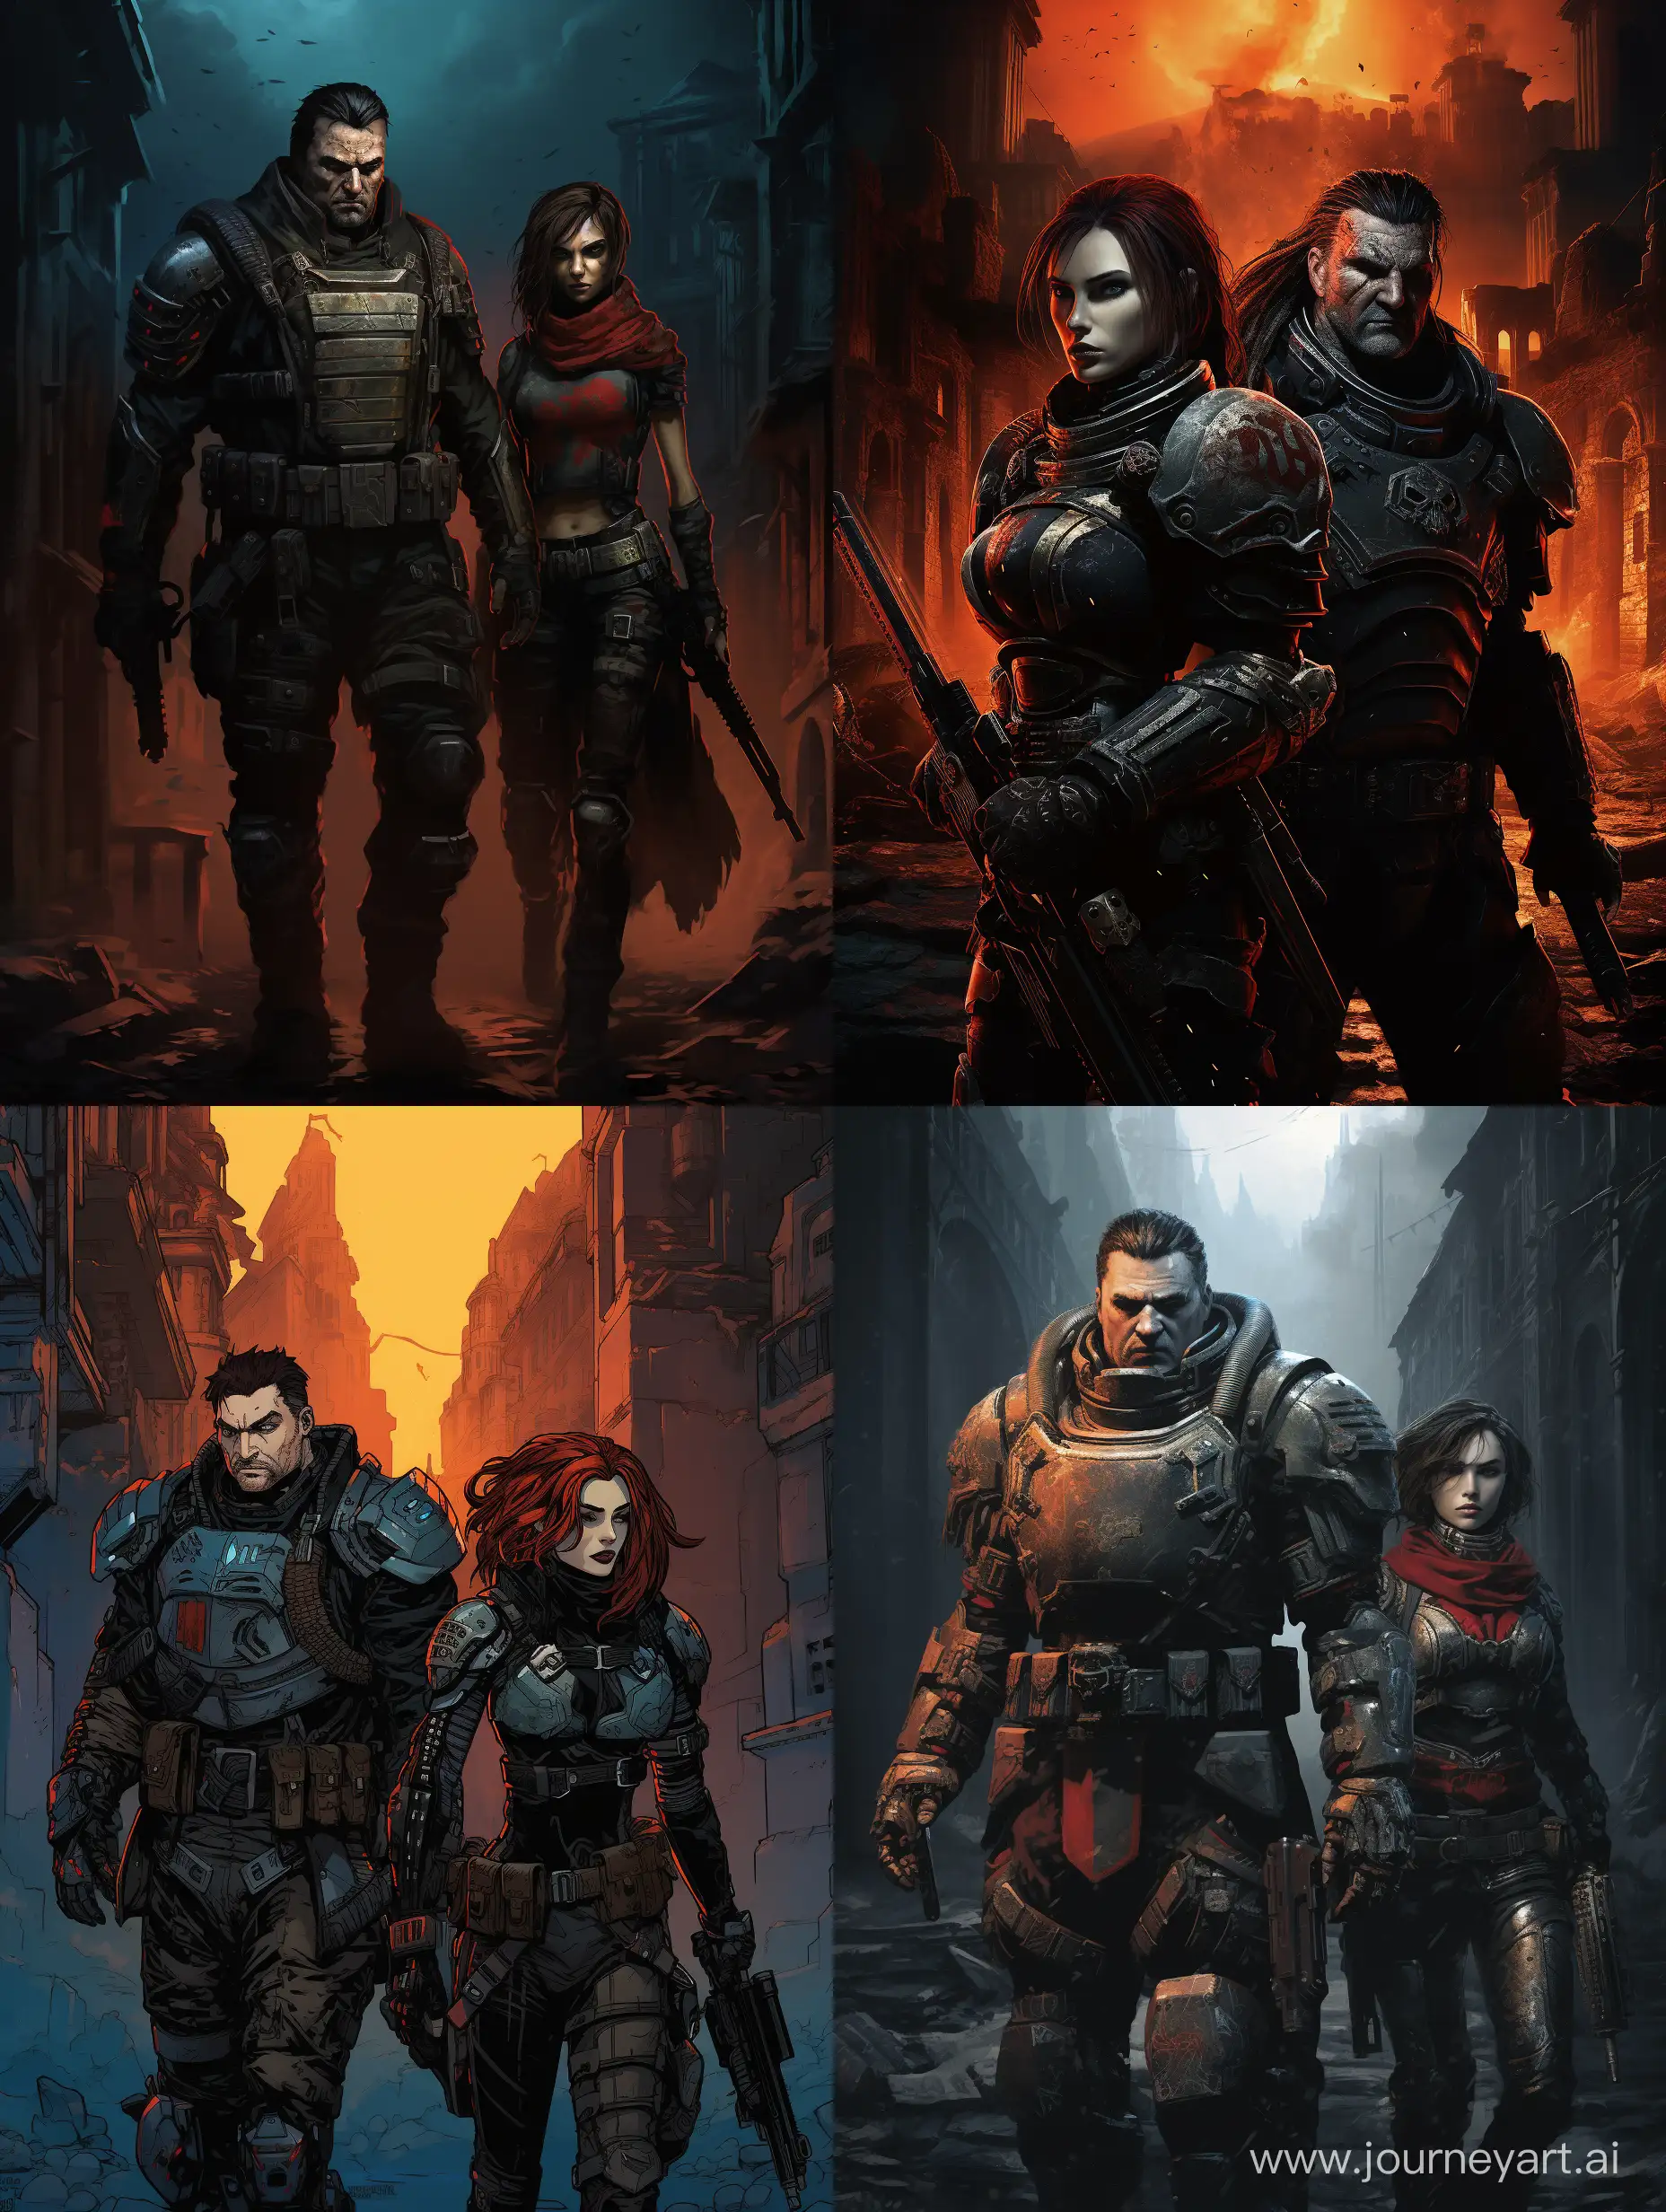 a space marine and a sister of battle from warhammer 40k universe are walking togheter in an urban destroied landscape. its night and you can see nebulas in the sky . The space marine has no helmet , has the insignia of bolood ravens on the shoulder, his hair is grey, short and crested. The sister of battle has asimetric pixie copper hair